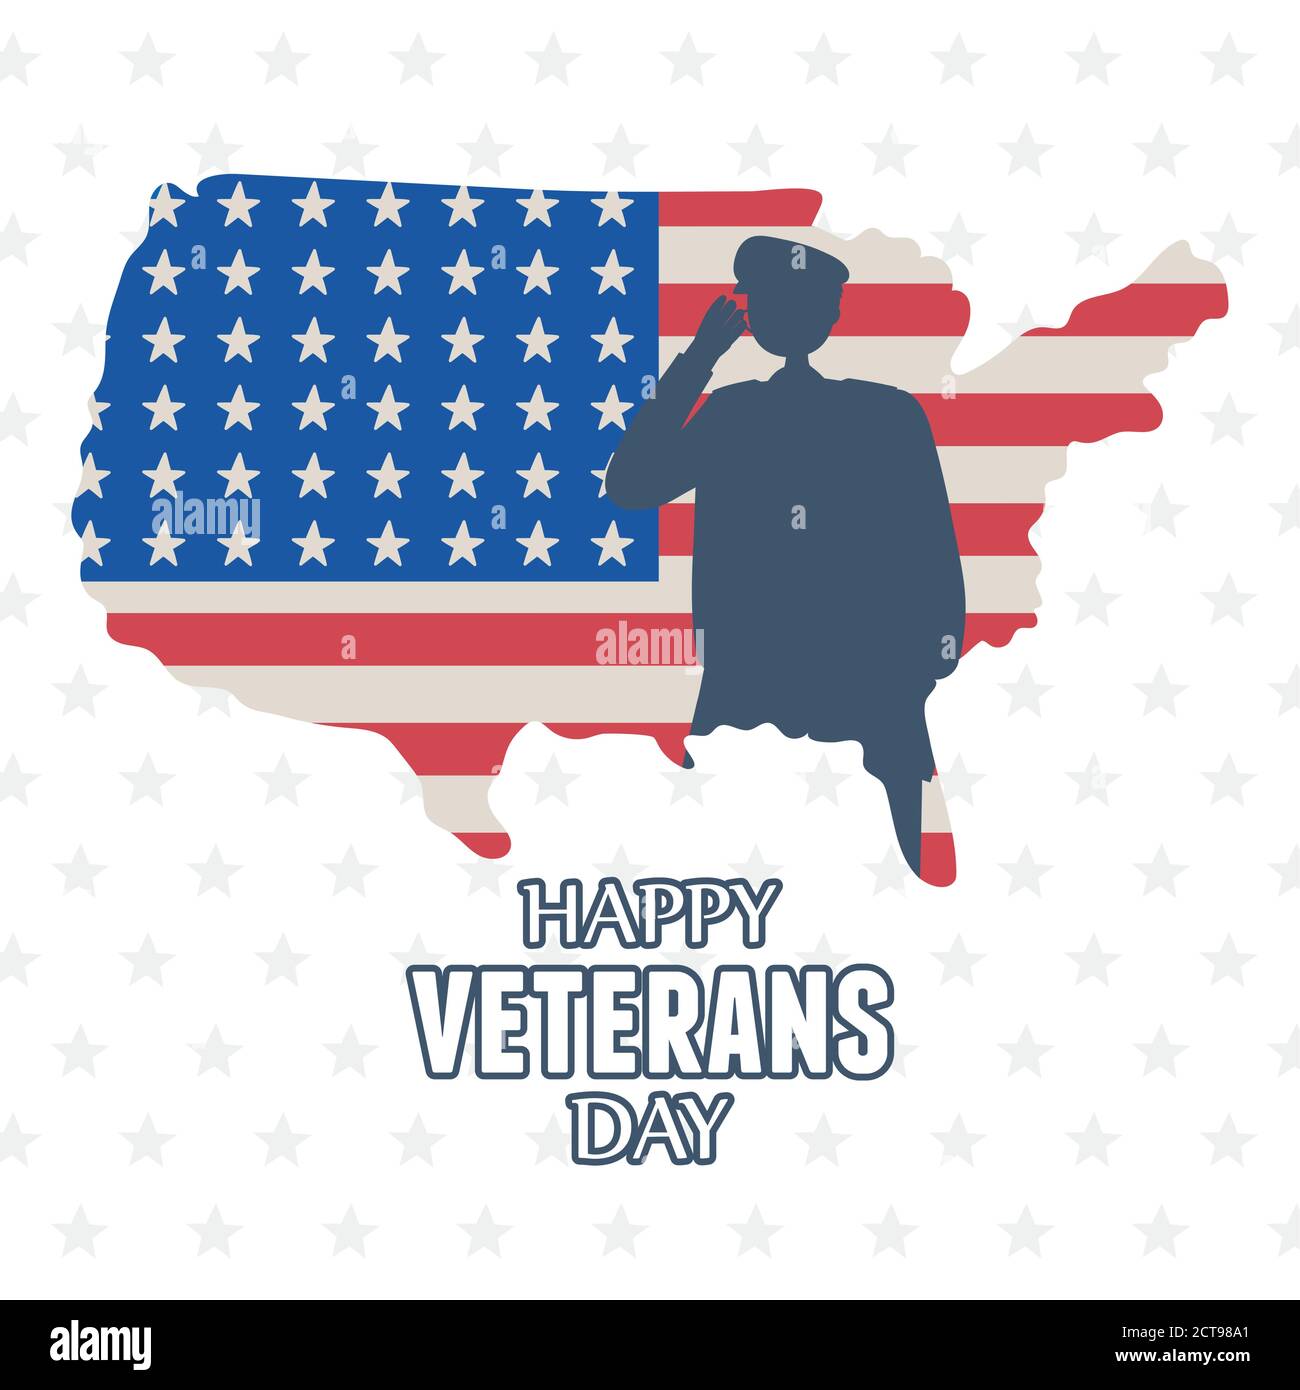 happy veterans day, US military armed forces soldier silhouette on american map with flag vector illustration Stock Vector